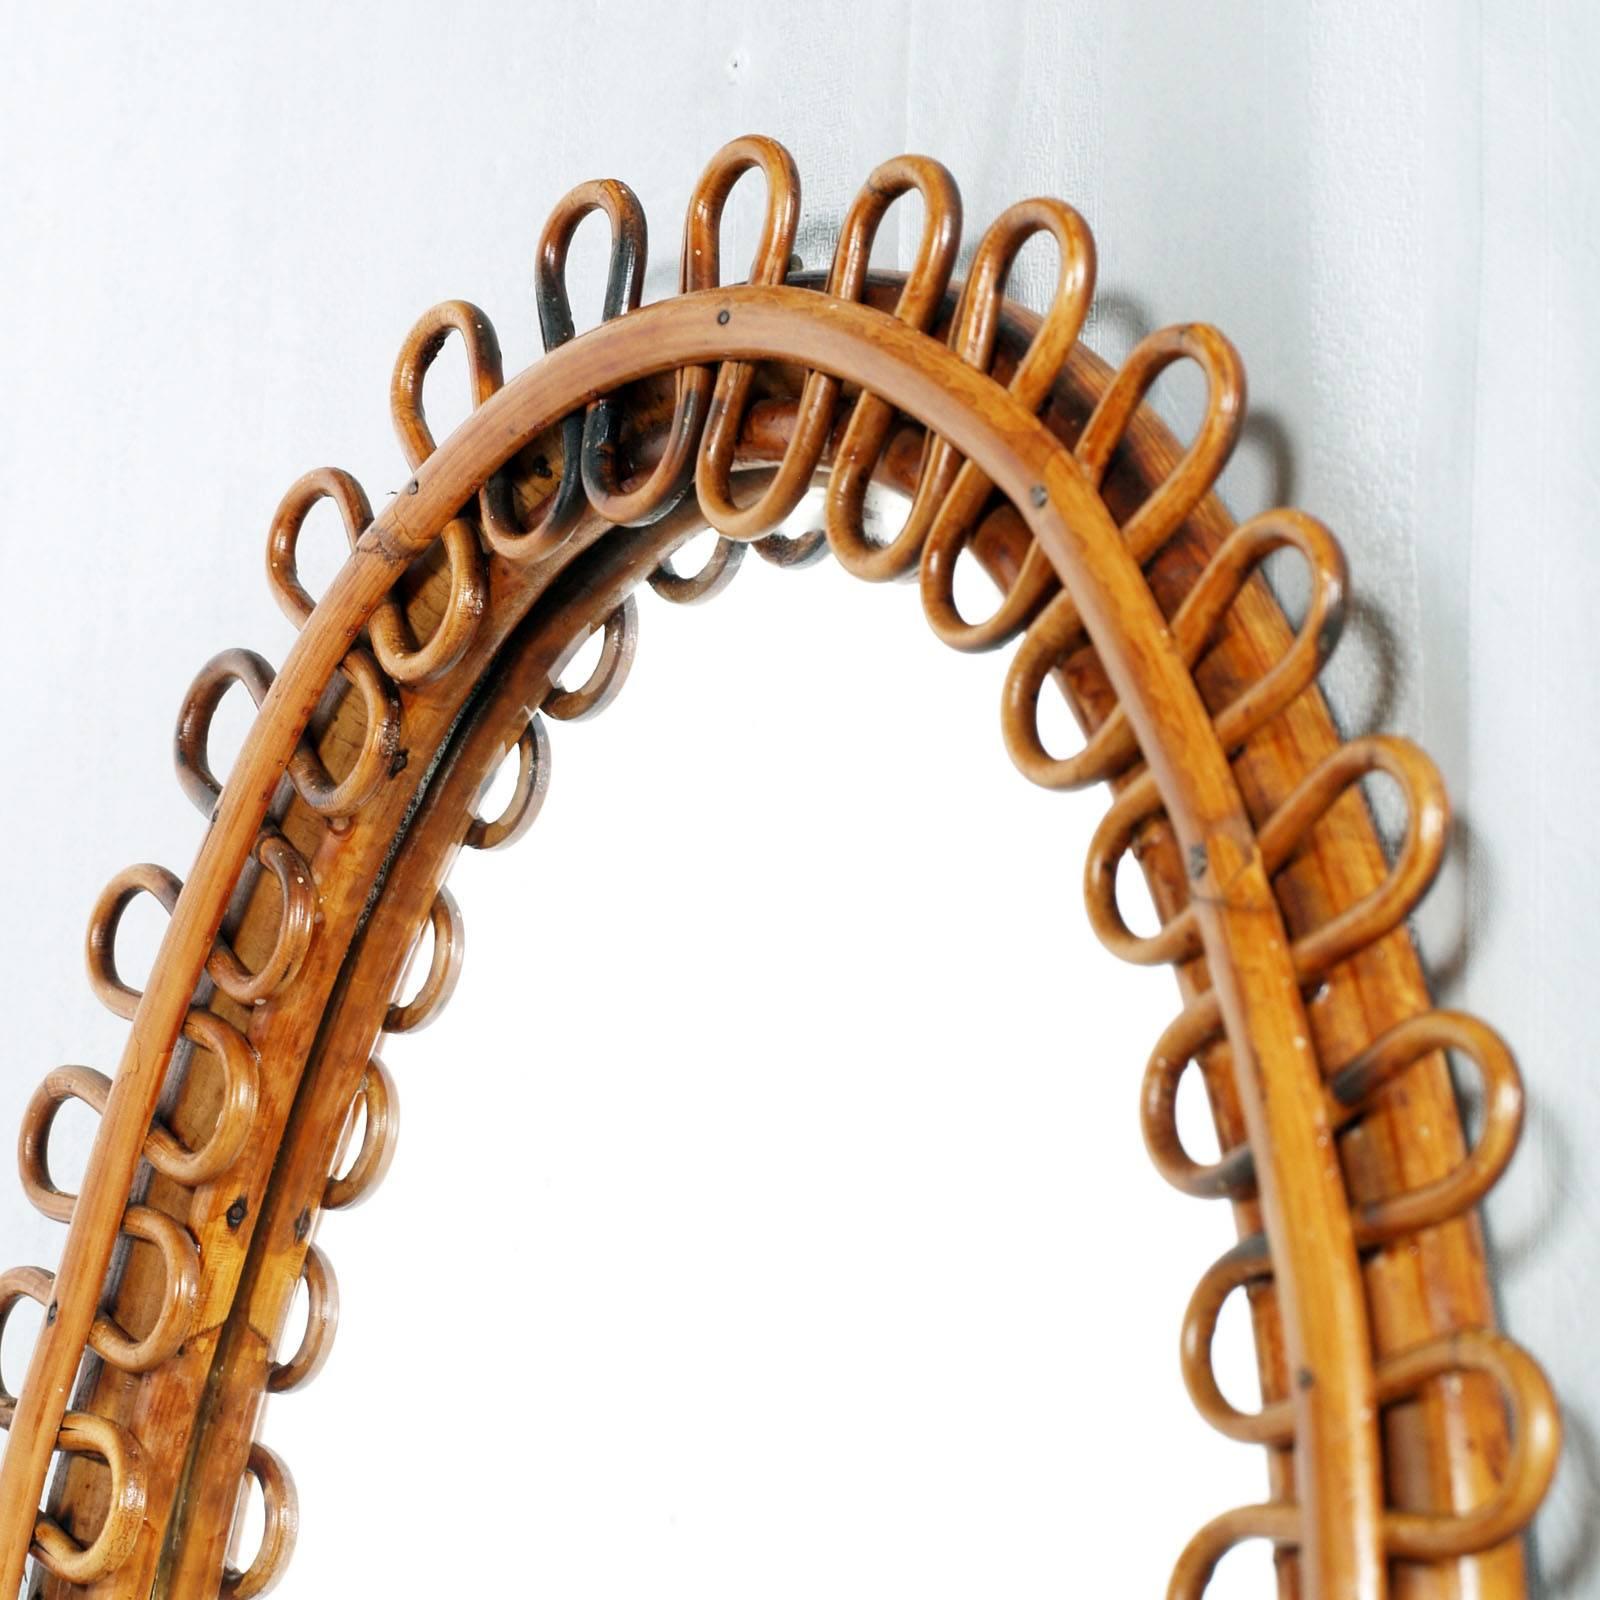 Mid-Century Modern wall rattan mirror, Franco Albini style, good conditions.

Measures cm: H 58, W 39, D 4.